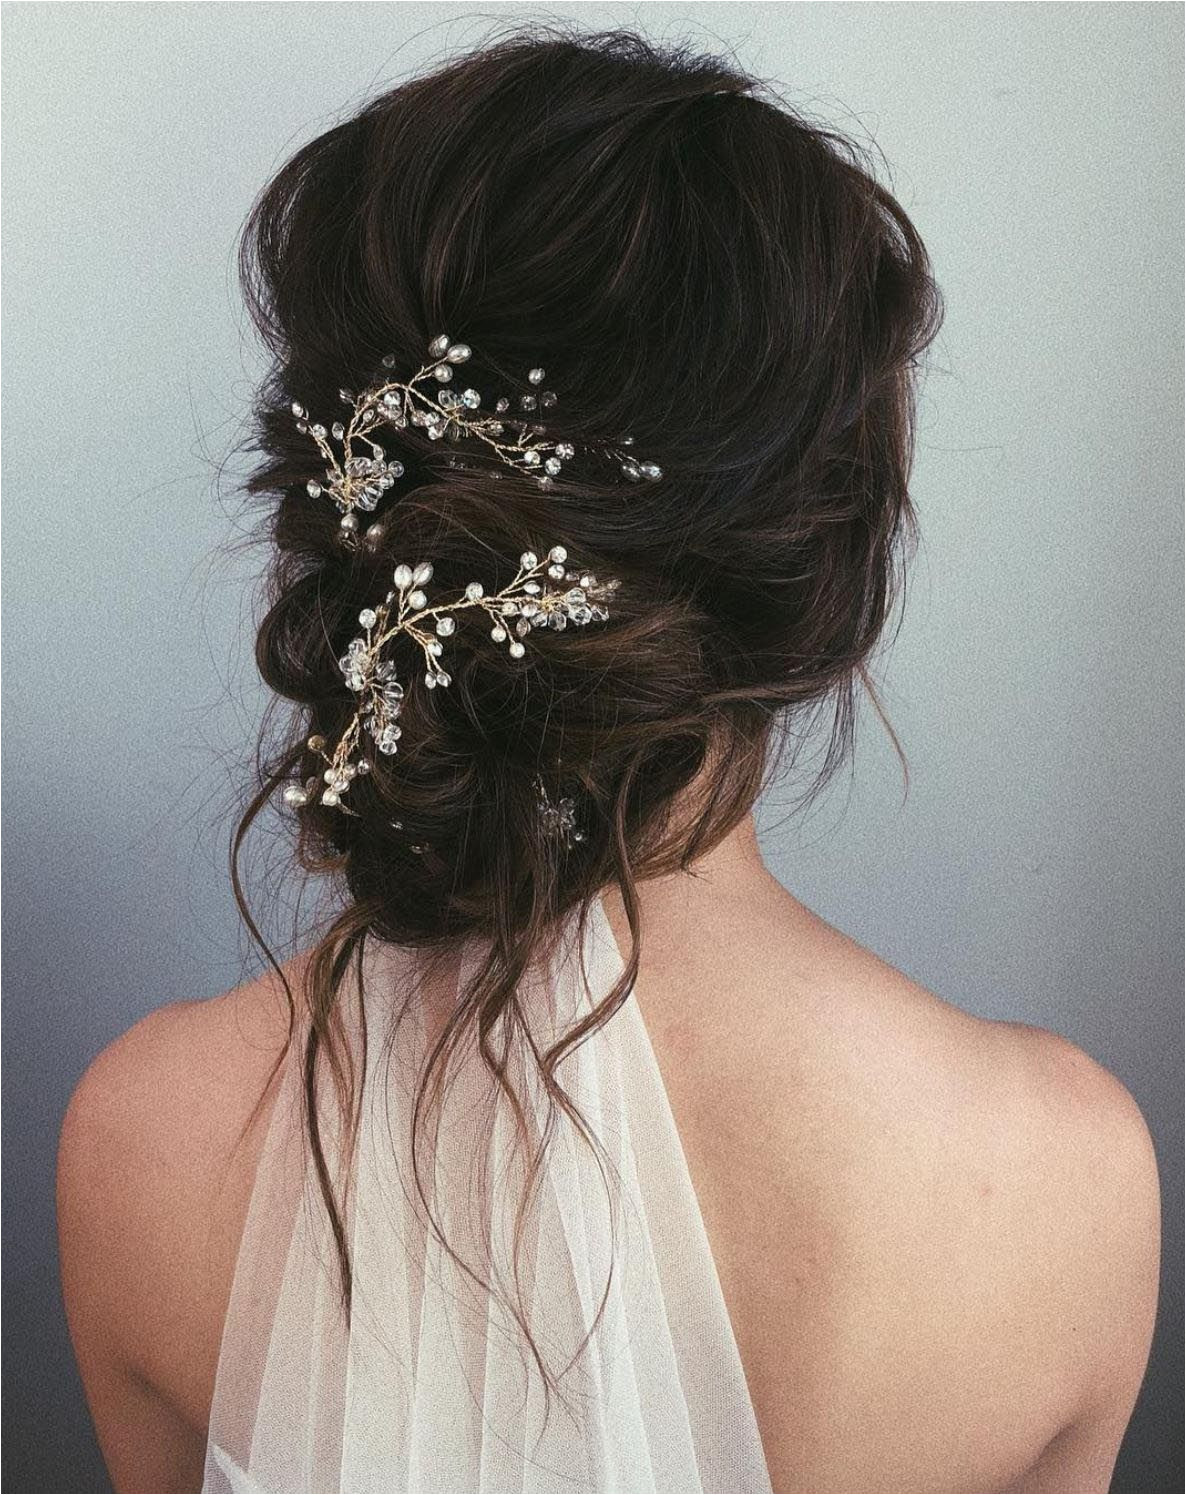 A hairpiece is all you need to take your messy bun from dressed down to dressed up